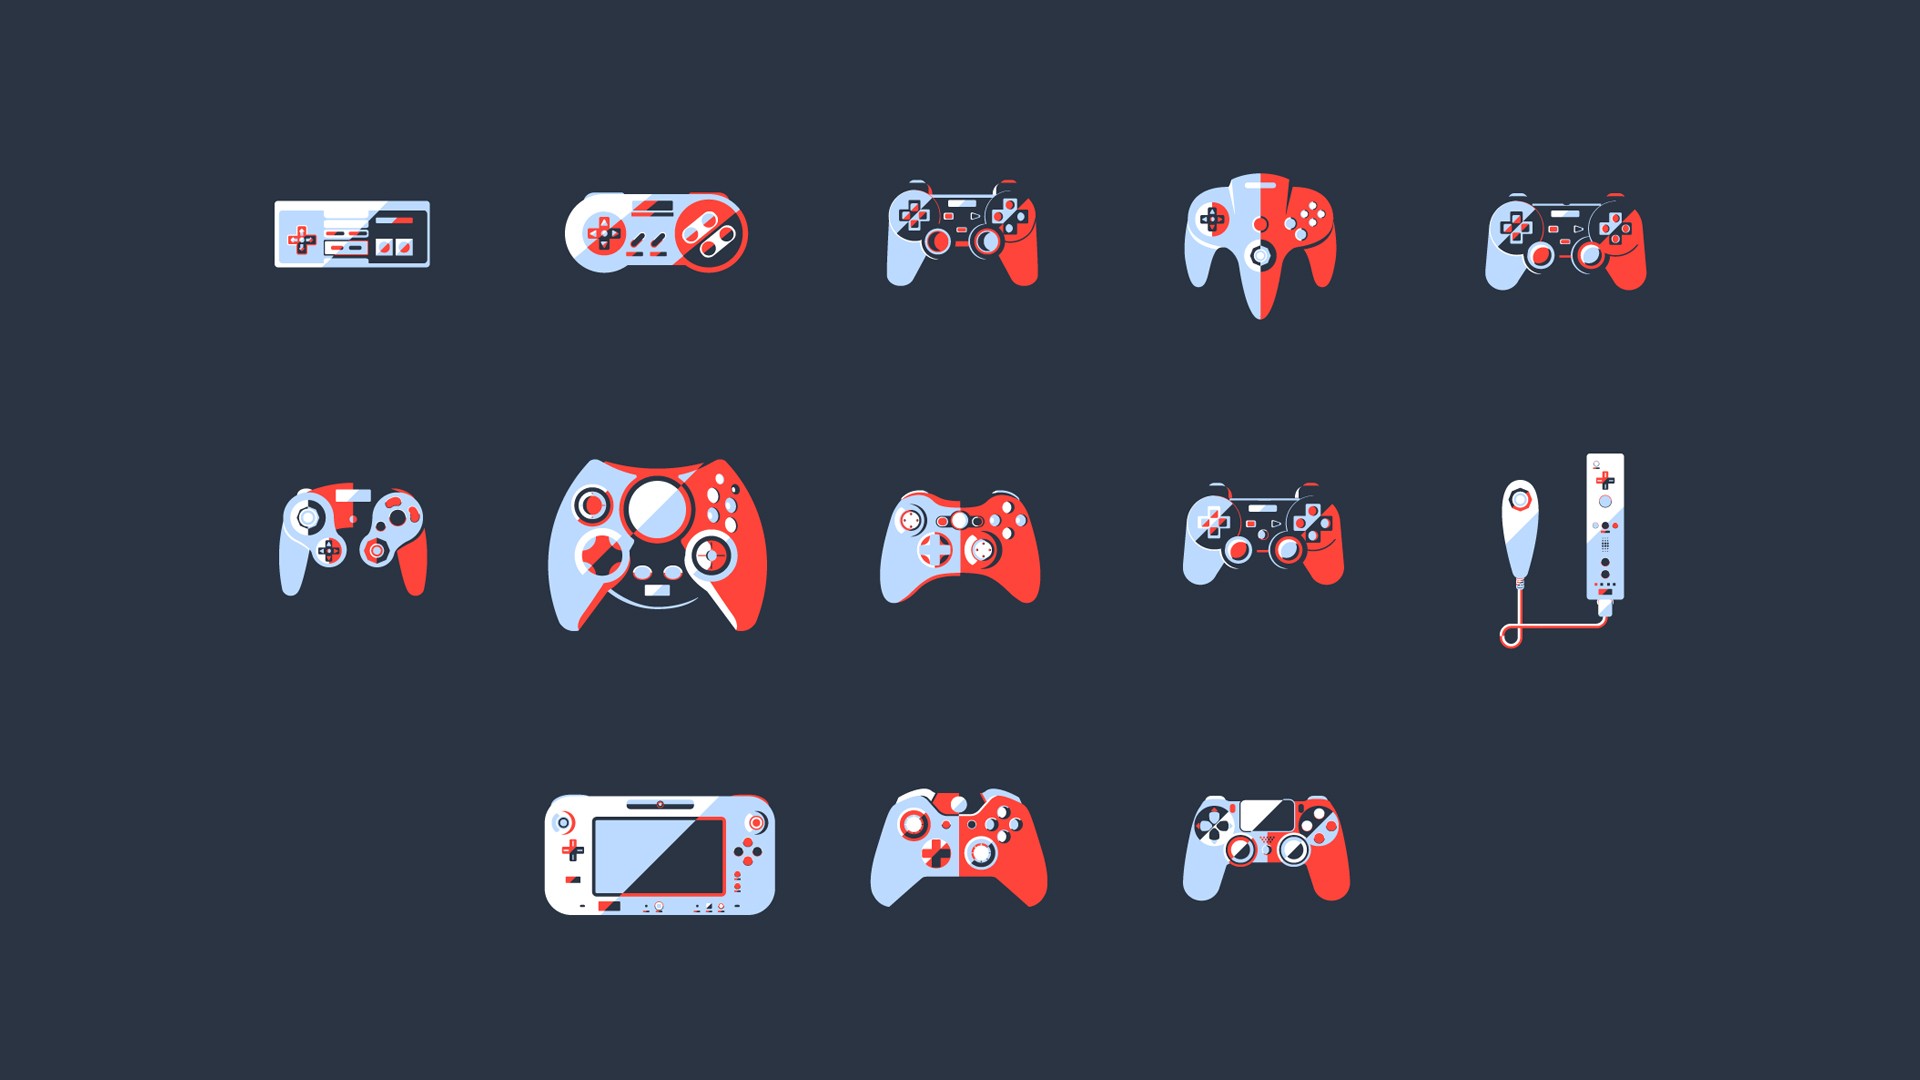 General 1920x1080 video games controllers simple background PlayStation Xbox Nintendo Entertainment System minimalism Dreamcast SNES Nintendo 64 GameCube